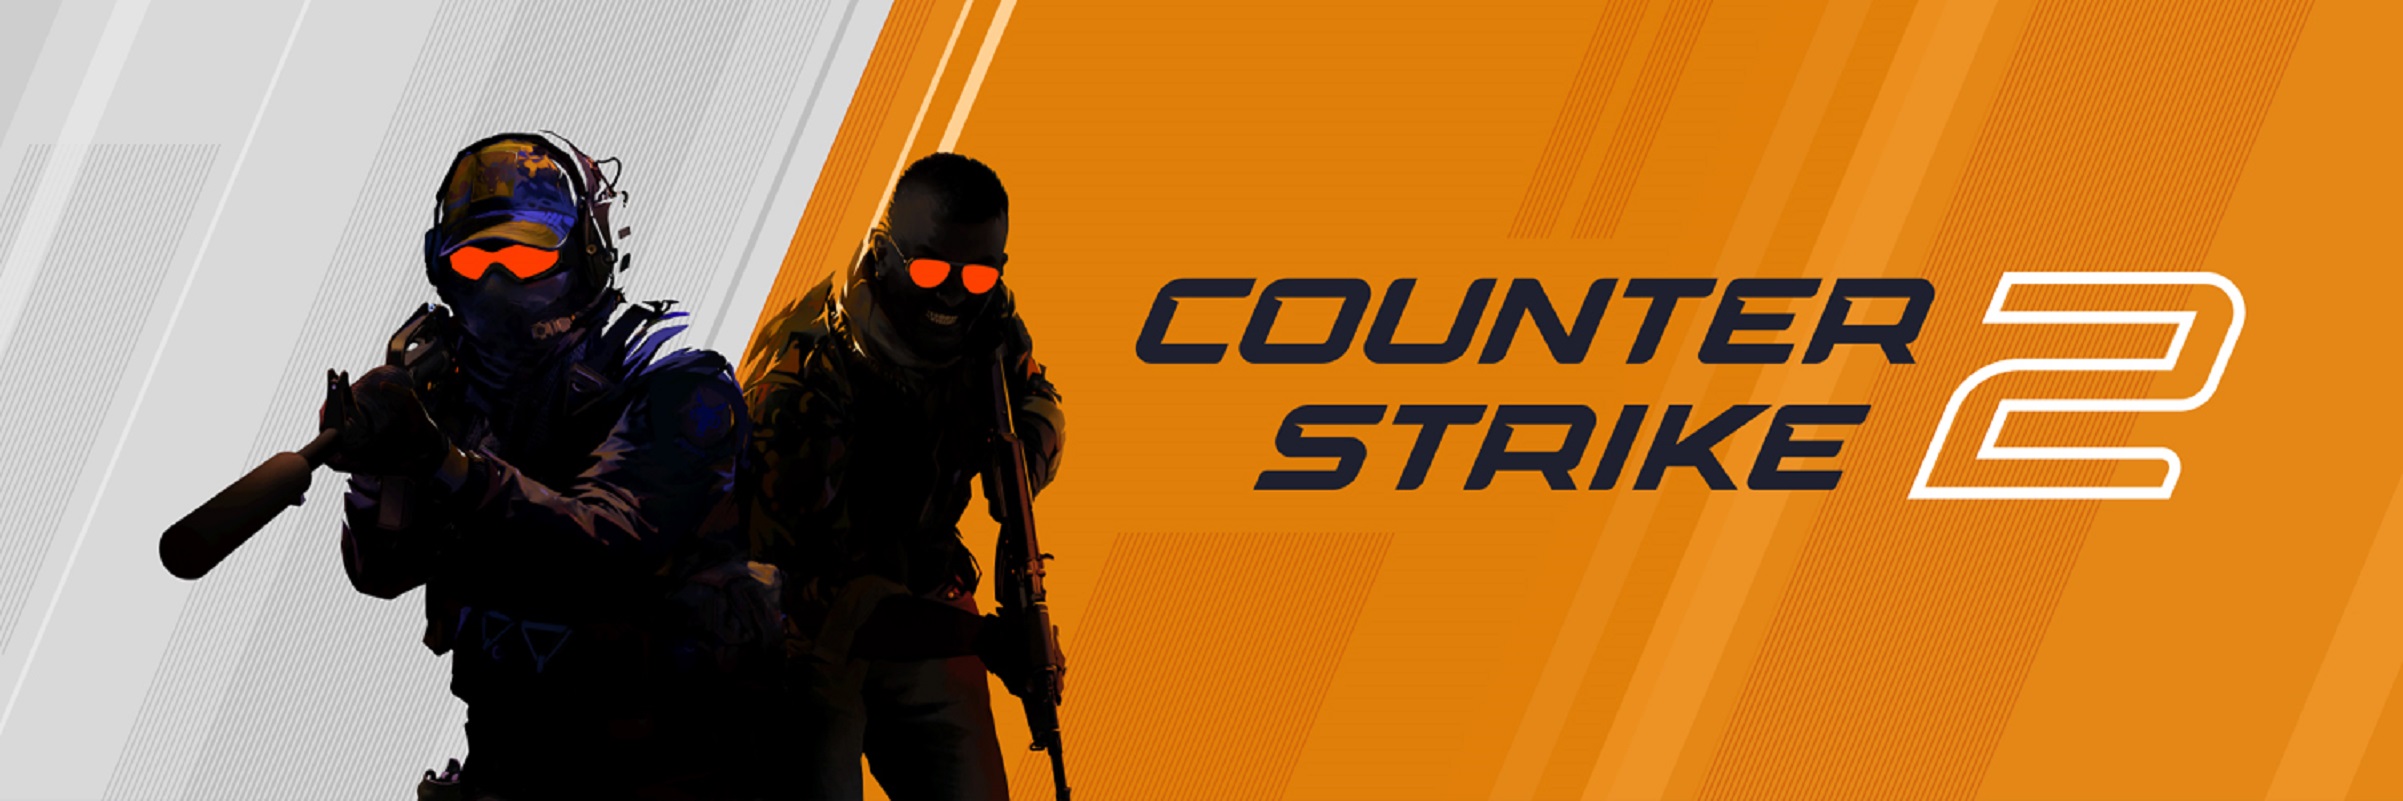 Counter Strike 2 is changing! - CS 1.6 servers